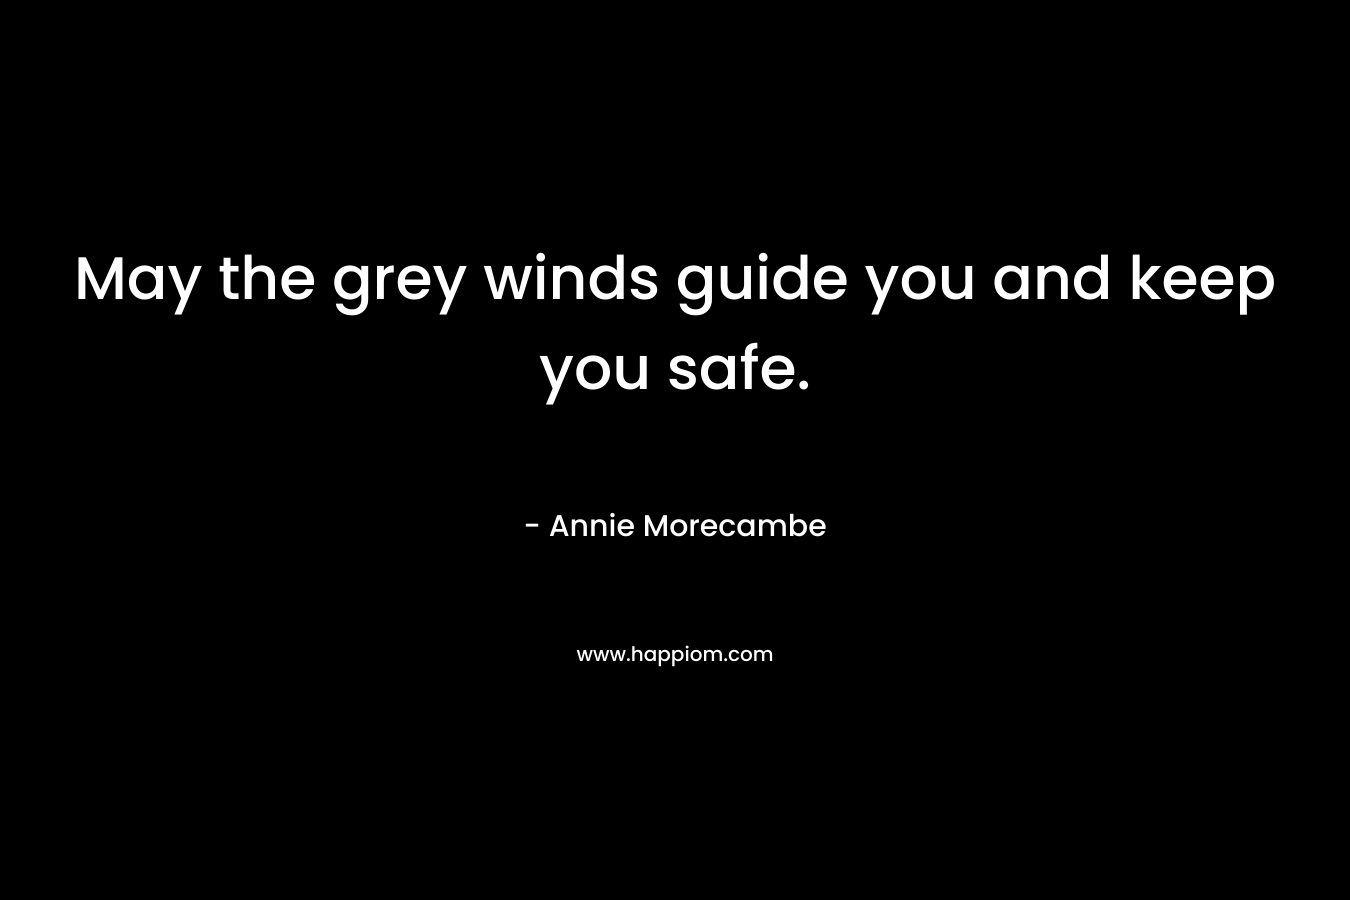 May the grey winds guide you and keep you safe. – Annie Morecambe